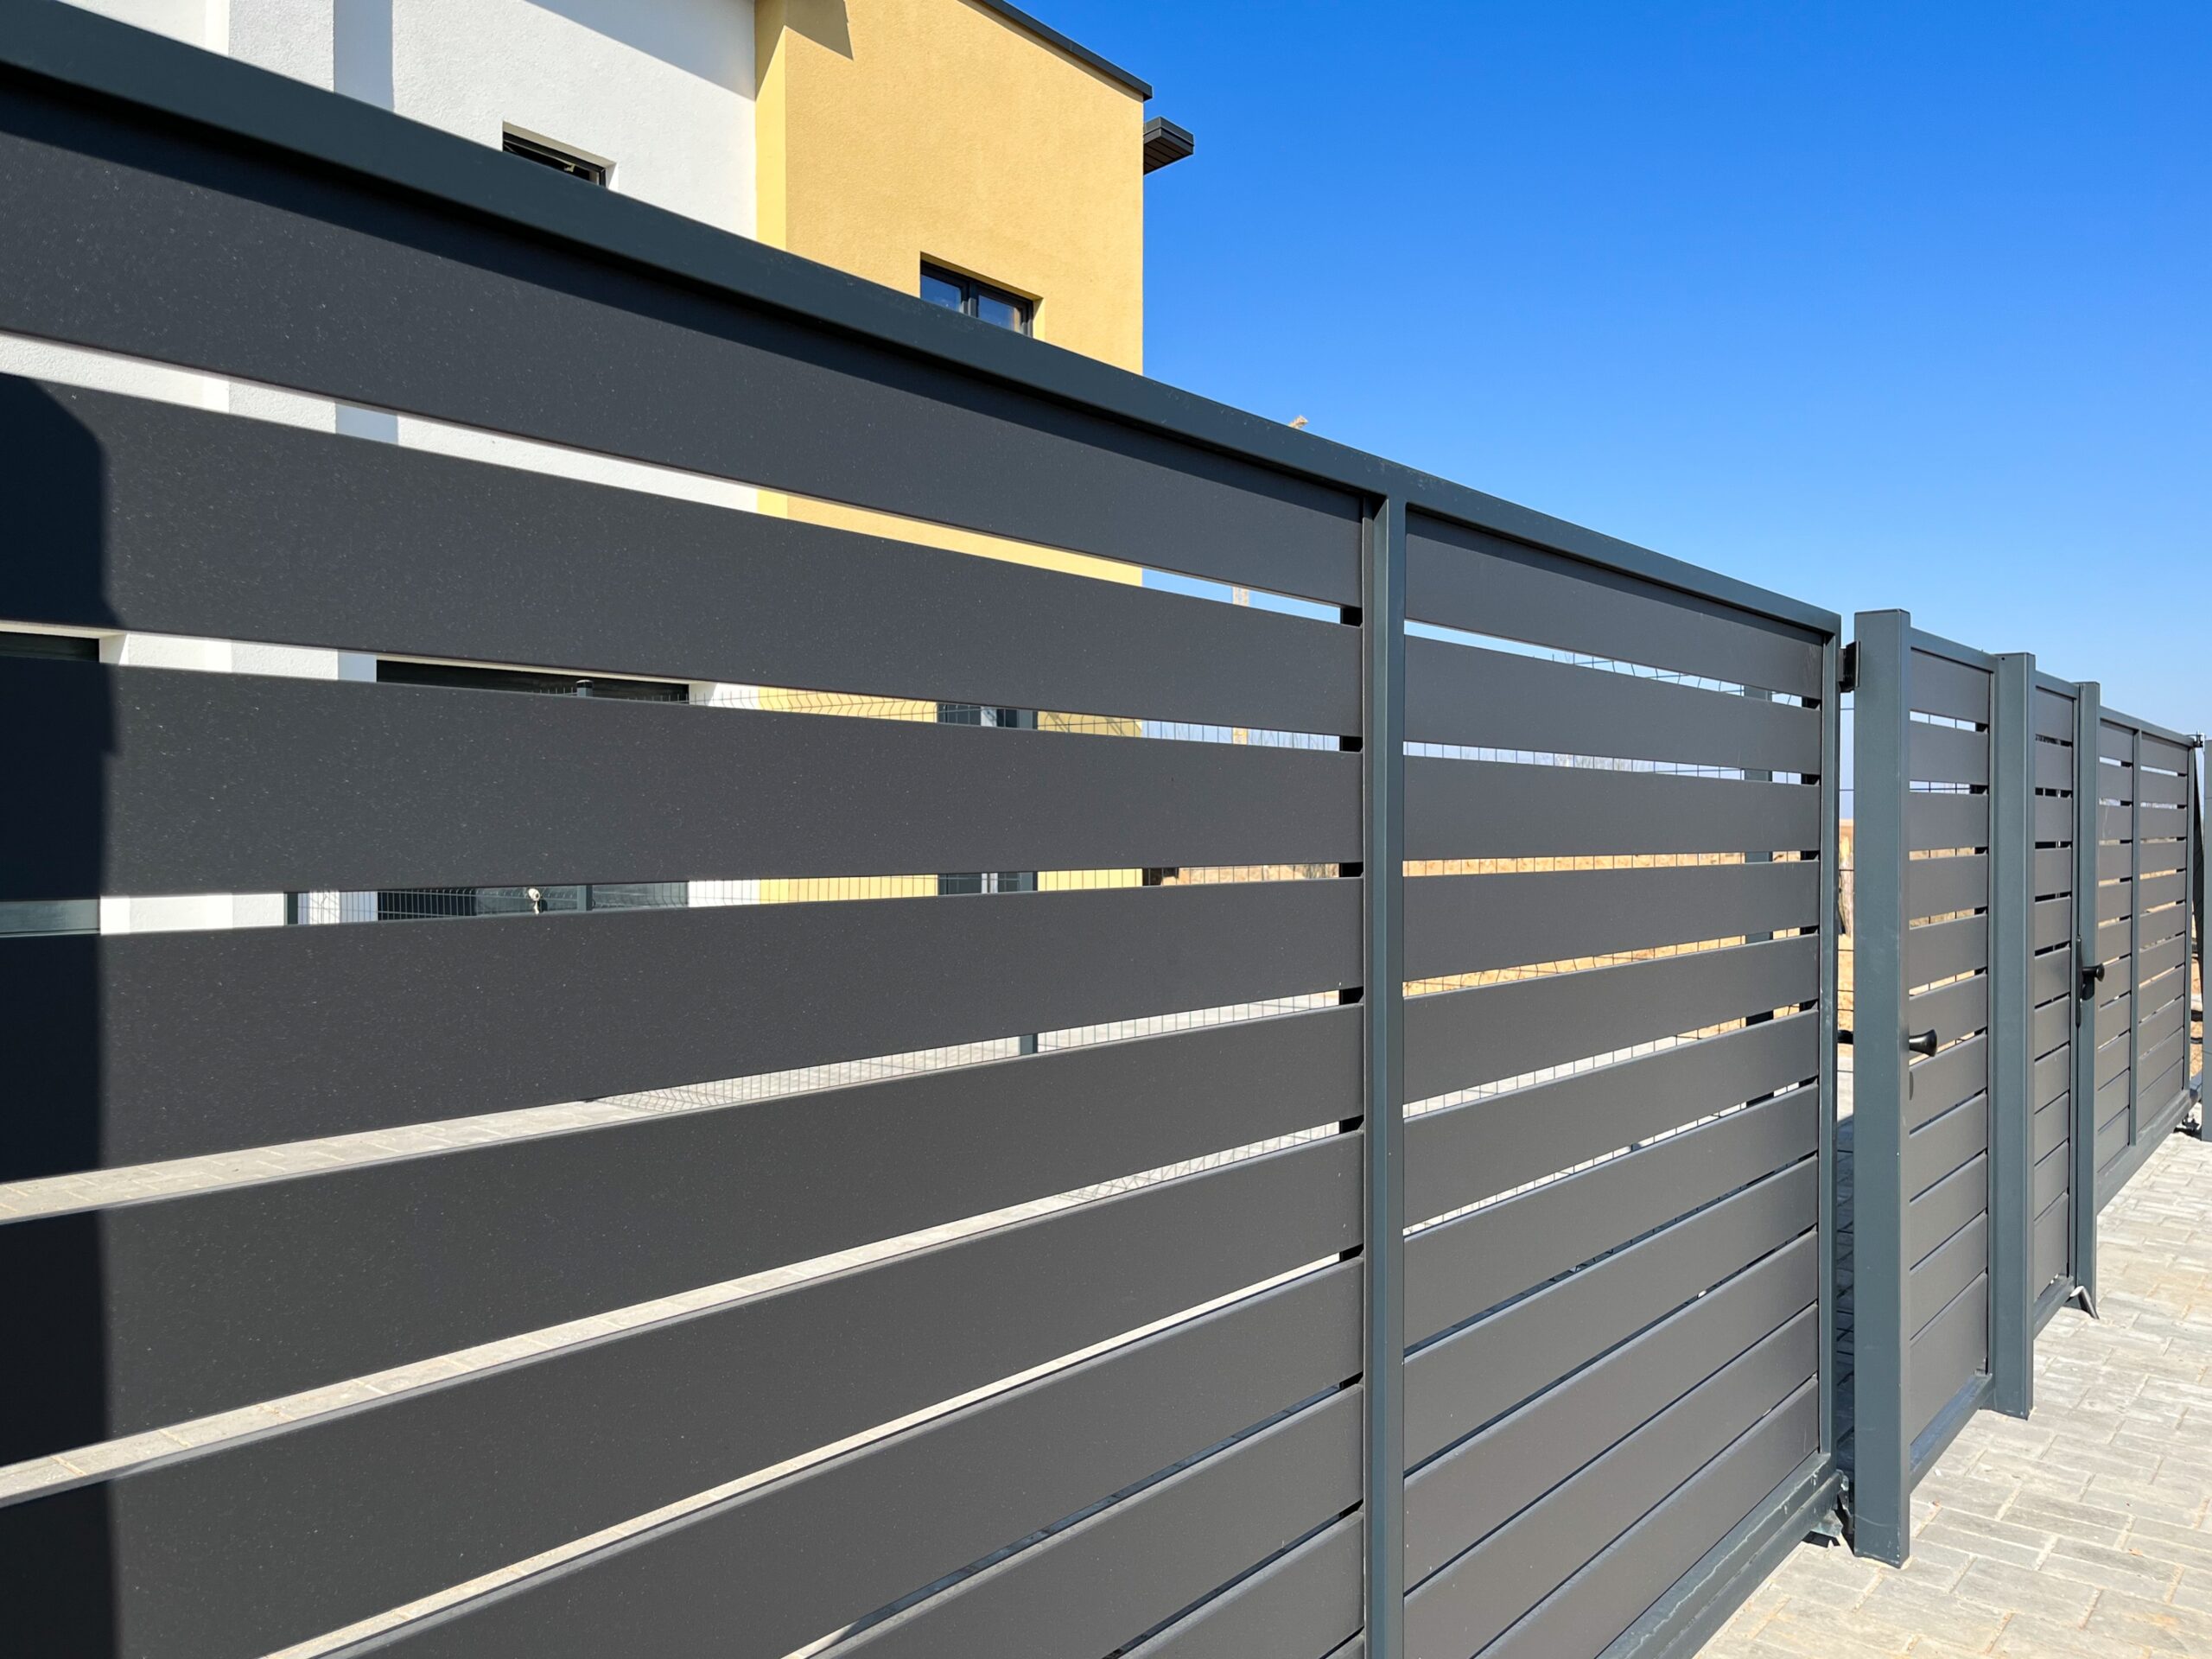 Aluminum Fence Installation in Colorado | Fence Installation Company In Belmont Nc